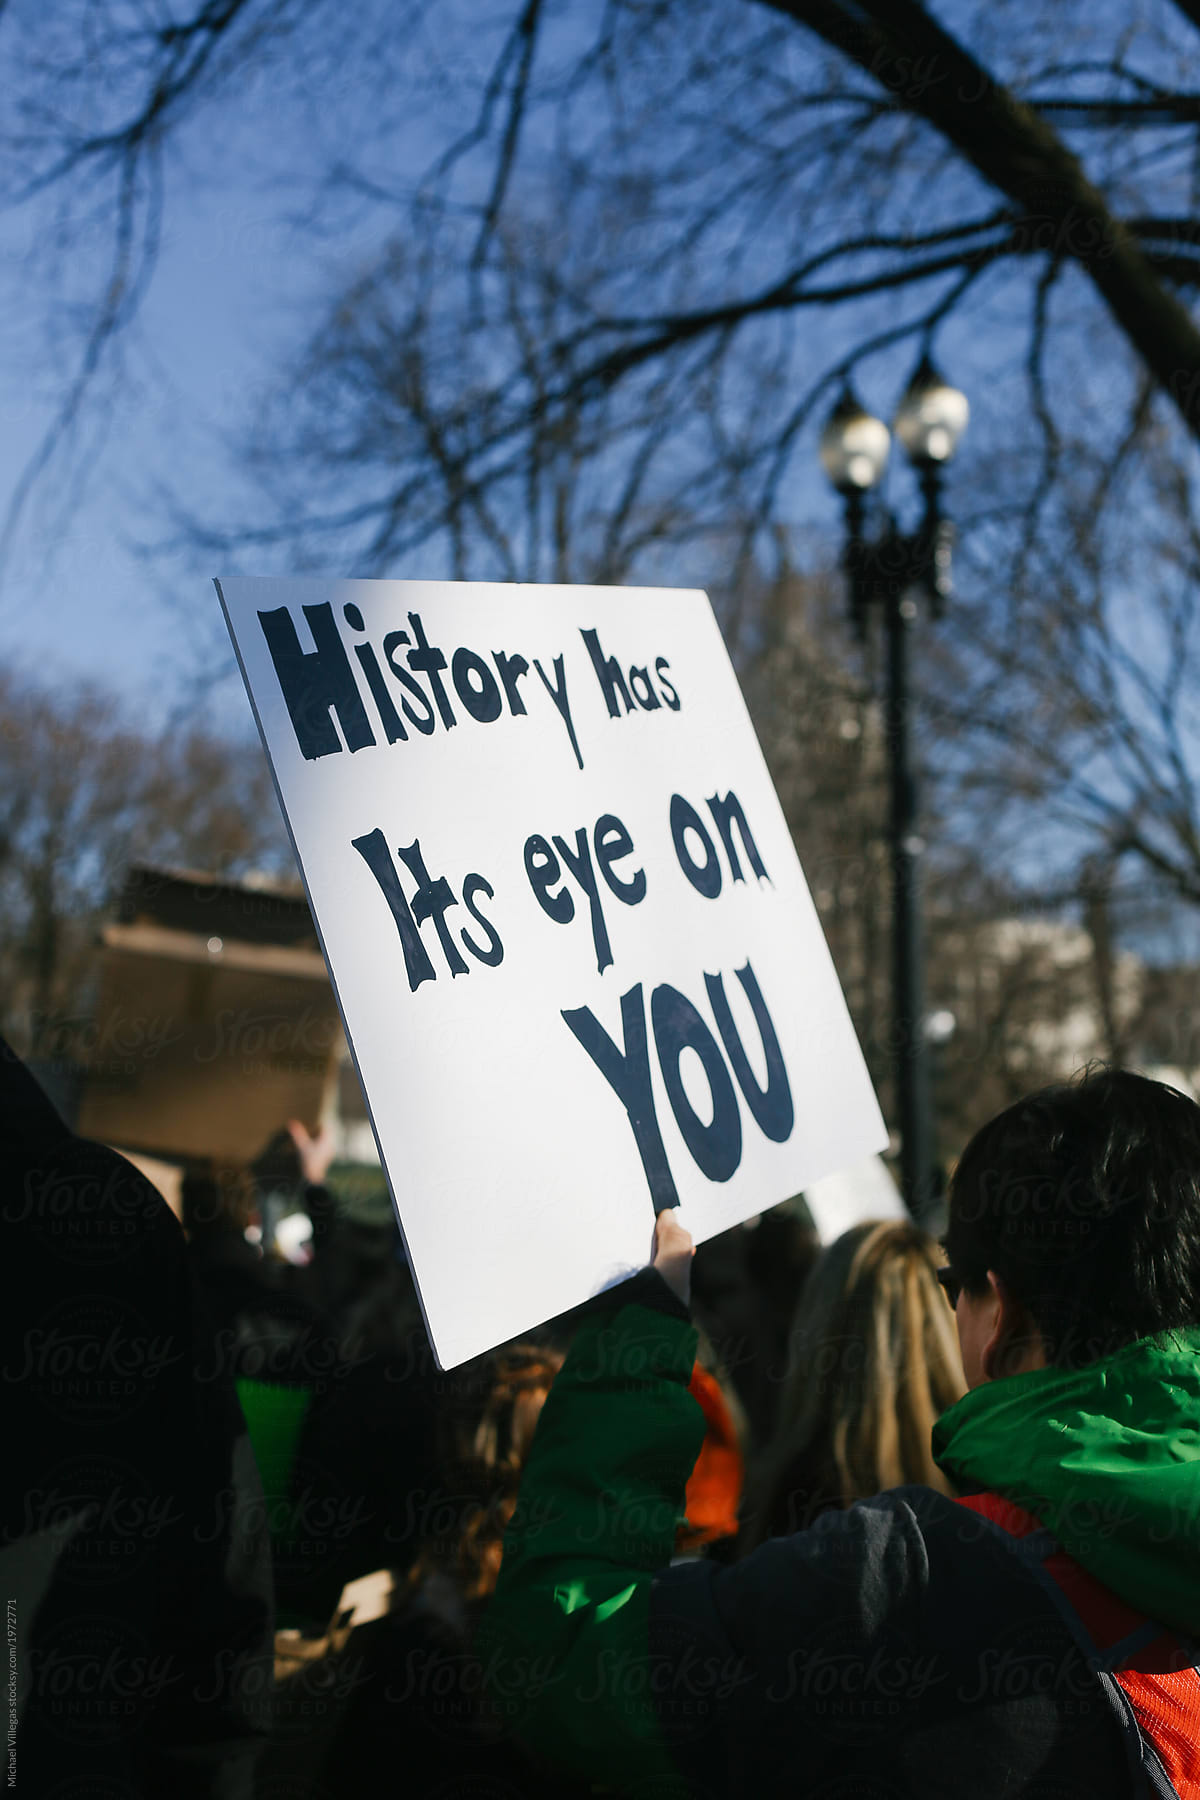 Protest: Person Holds Sign That History Has Its Eye On You